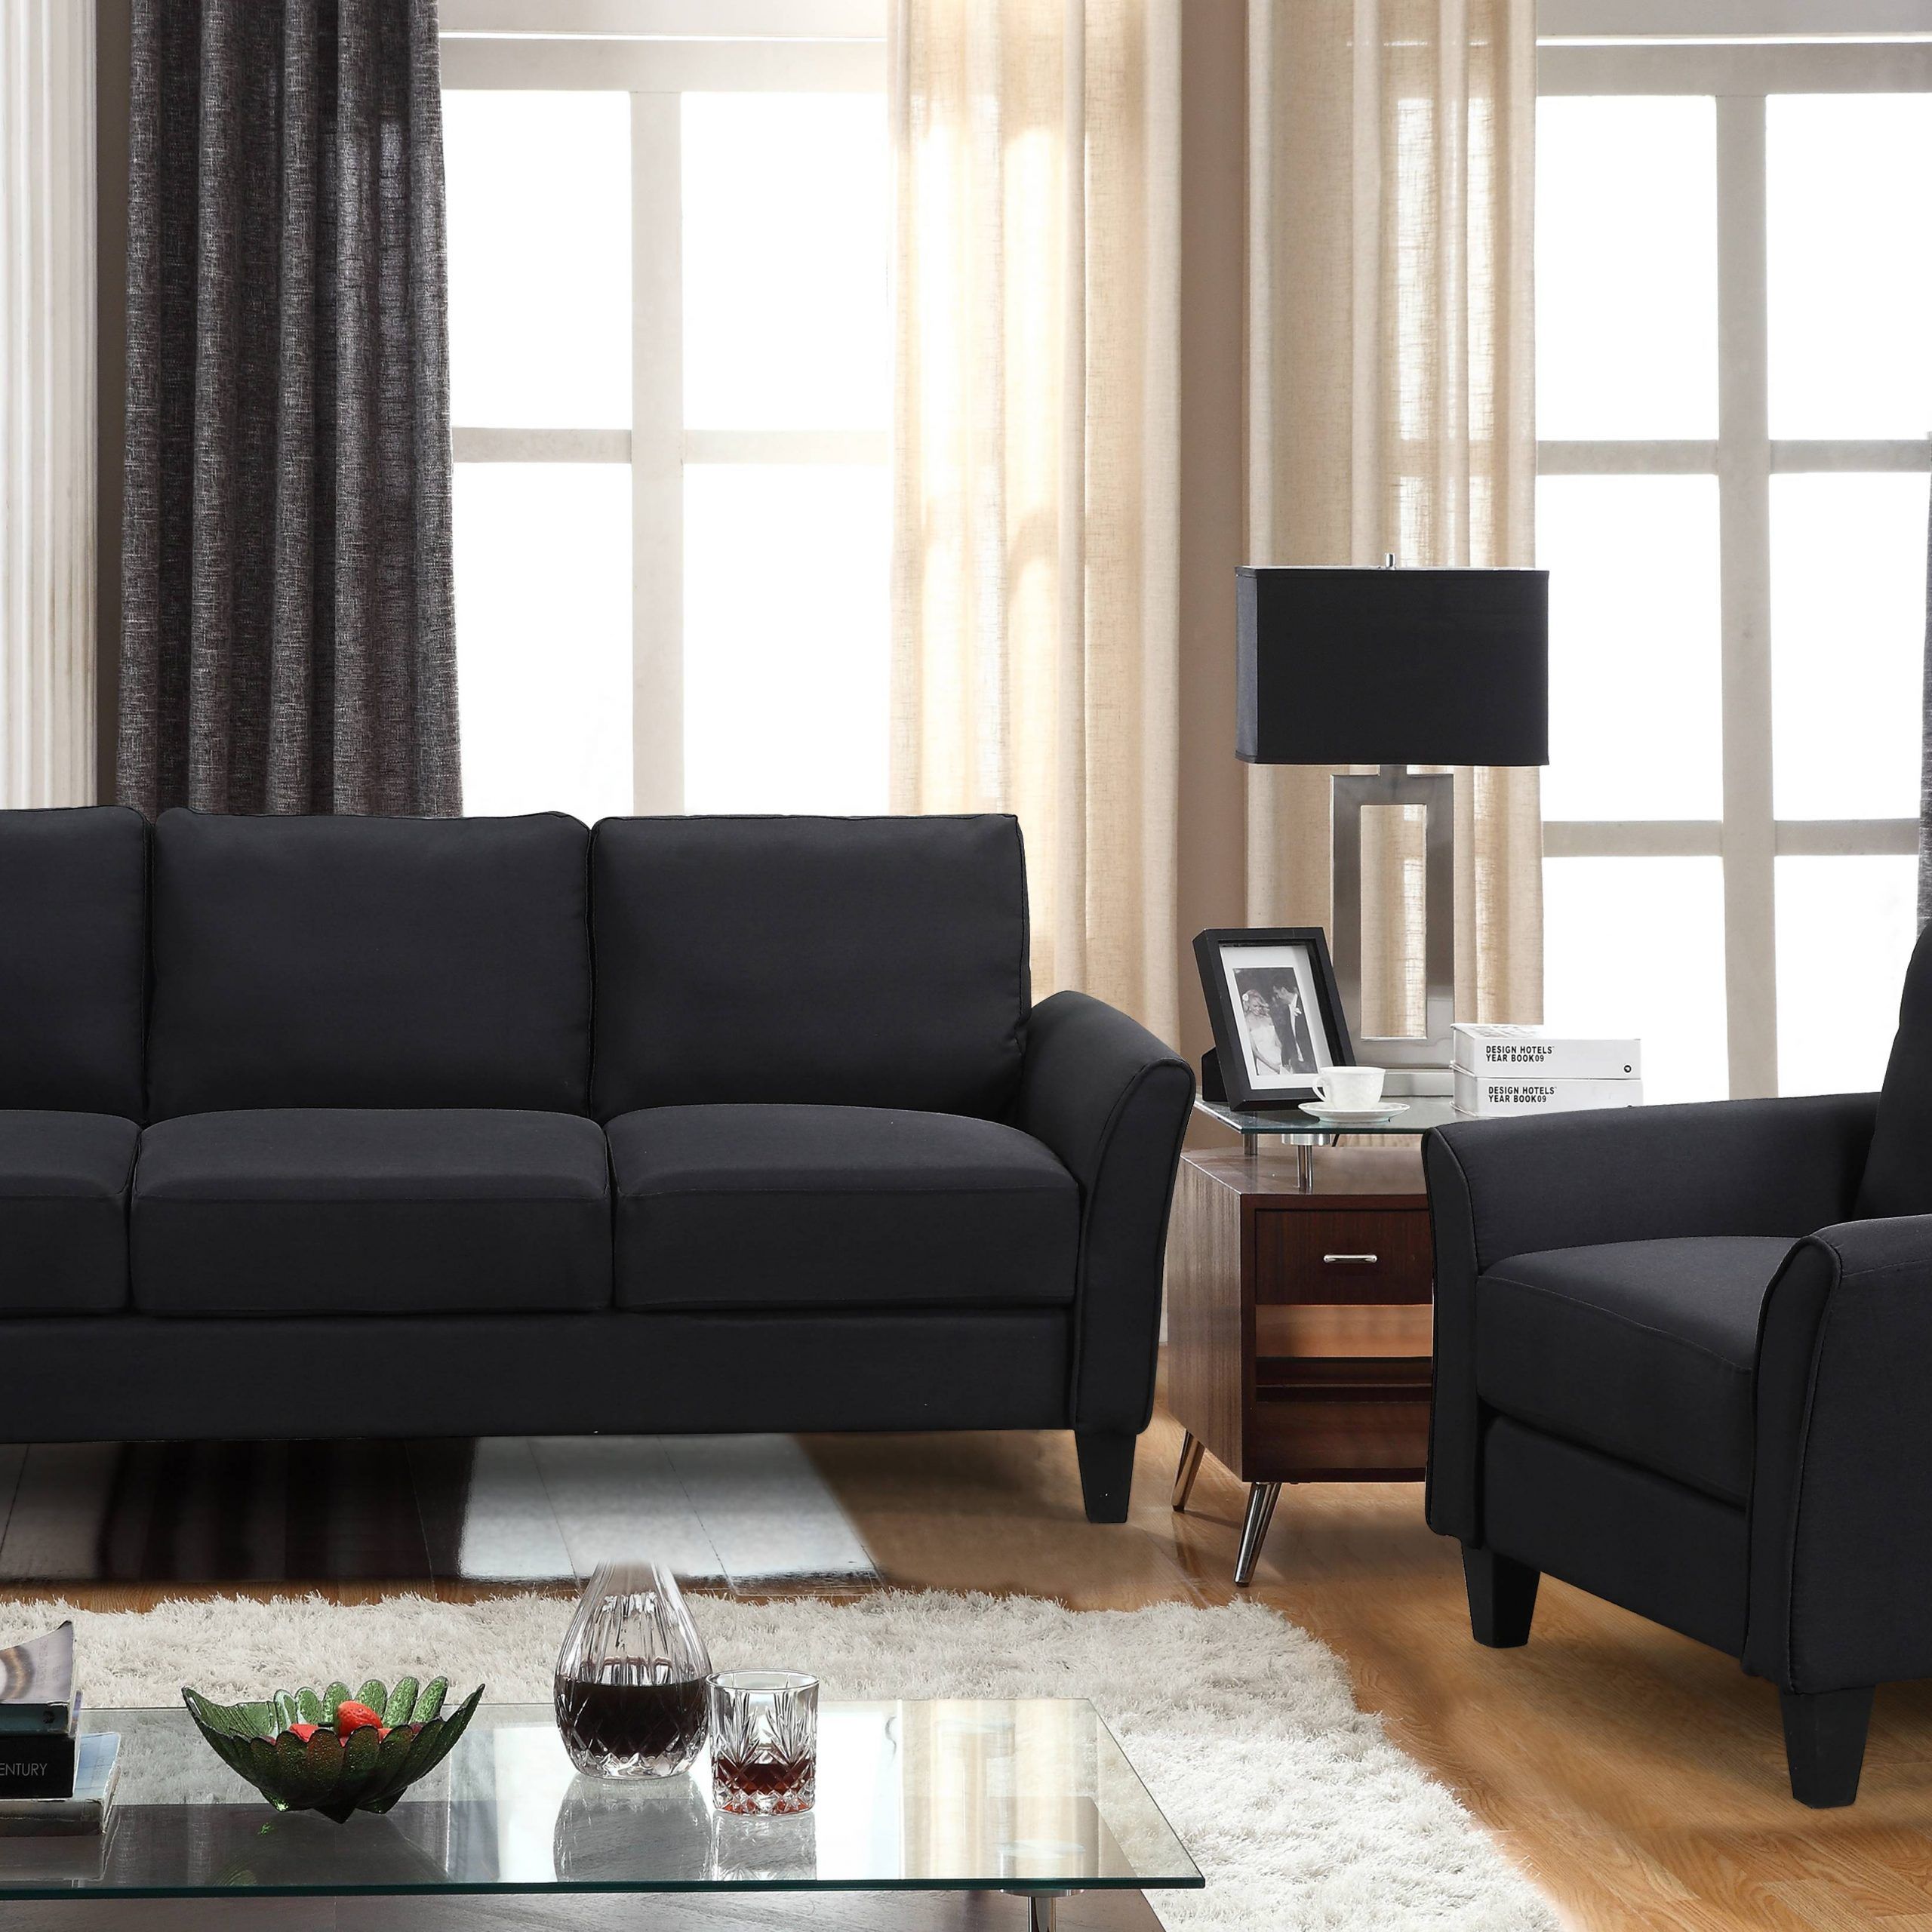 3 Piece Sectional Couch, Living Room Furniture Sofa With Removable With 3 Piece Console Tables (View 9 of 20)